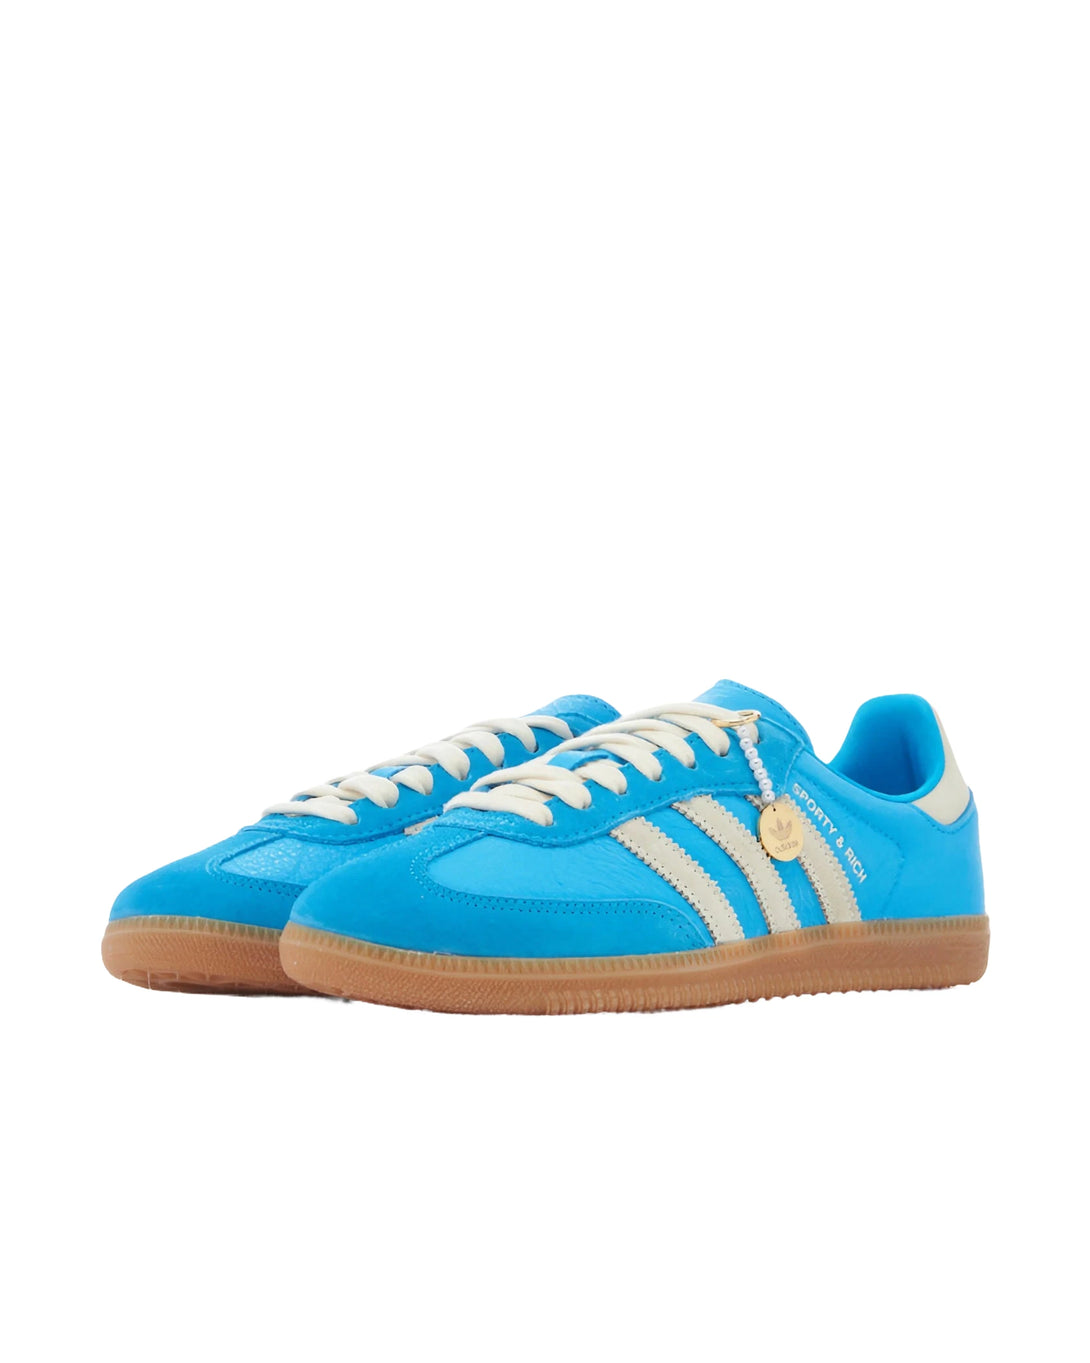 adidas Samba - OG Sporty & Rich Blue Rush Shoes | Sole Quest Sneakers